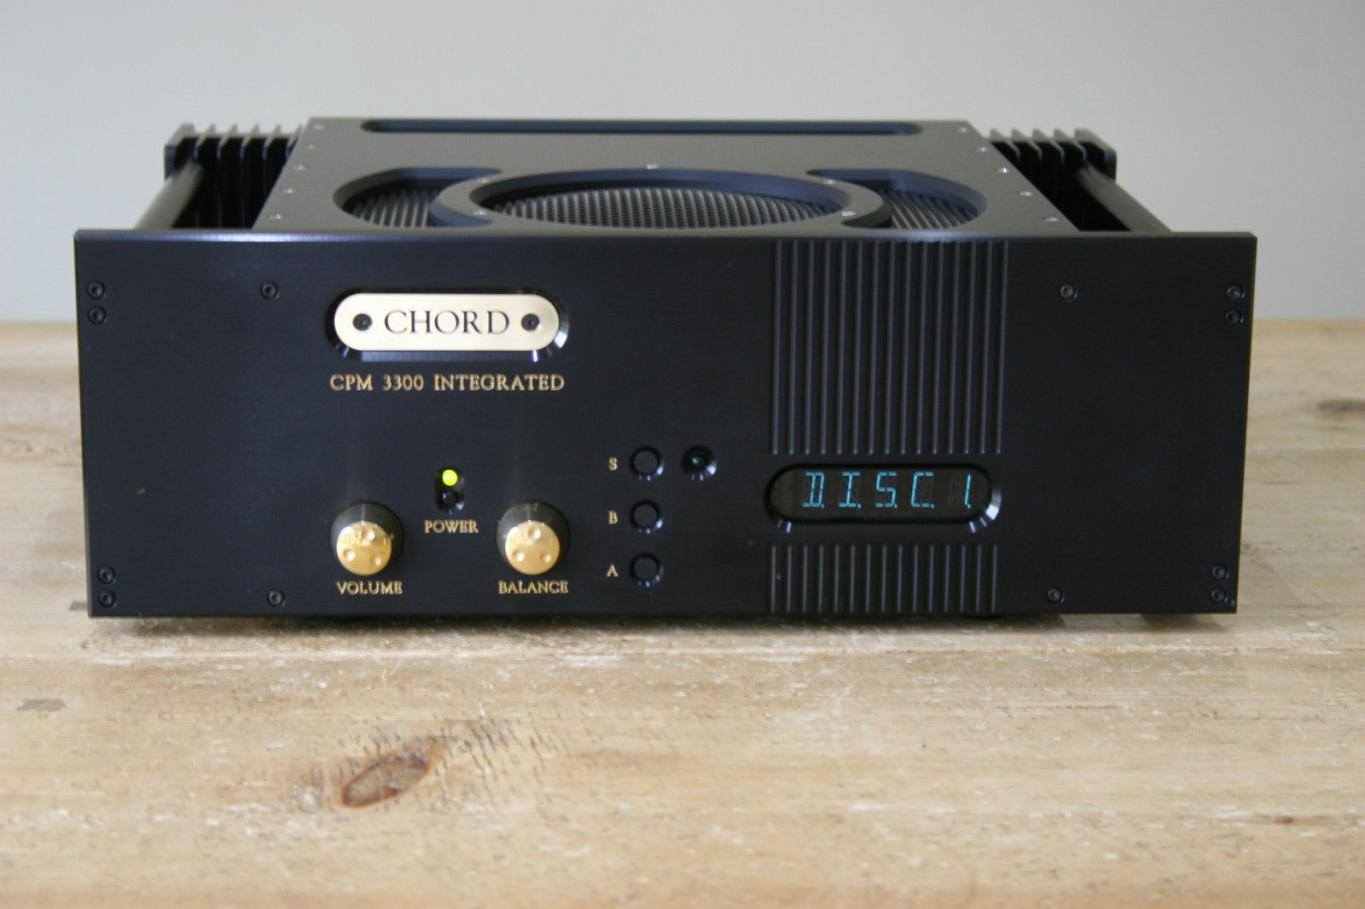 Chord CPM 3300 Flagship Integrated Amplifier